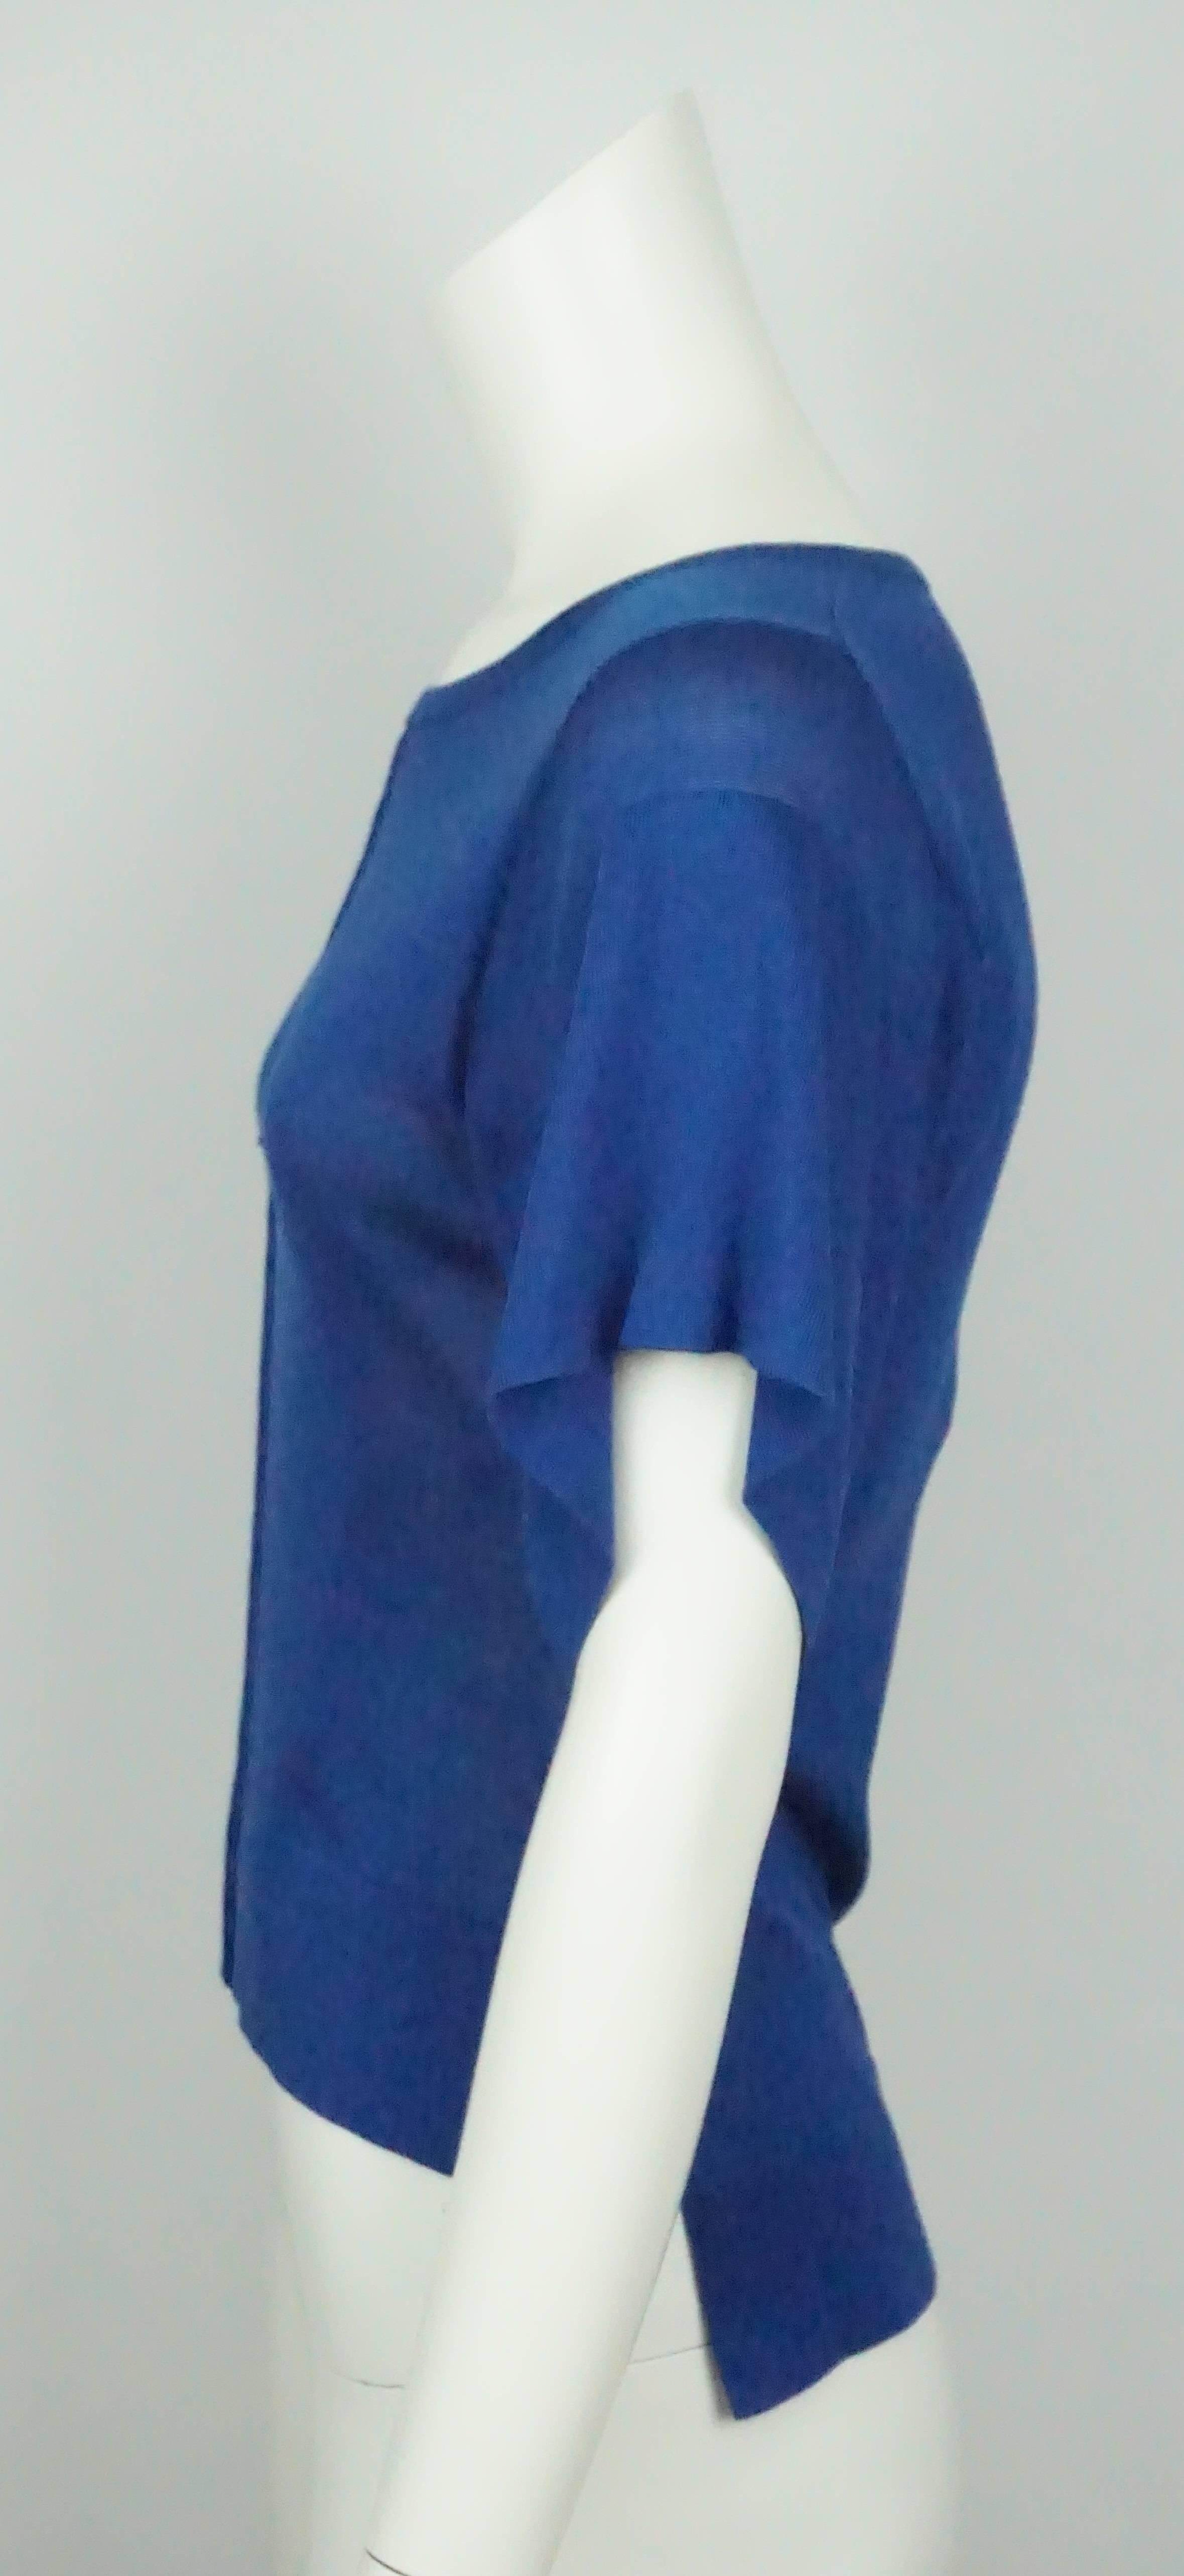 Emilio Pucci Royal Blue Silk Knit Top - XS - NWT  This top is made of a silk knit, has a round collar, short sleeve and is shorter in the front and longer in the back. The top is new and has the tags still hanging. 
Measurements:
Shoulder to